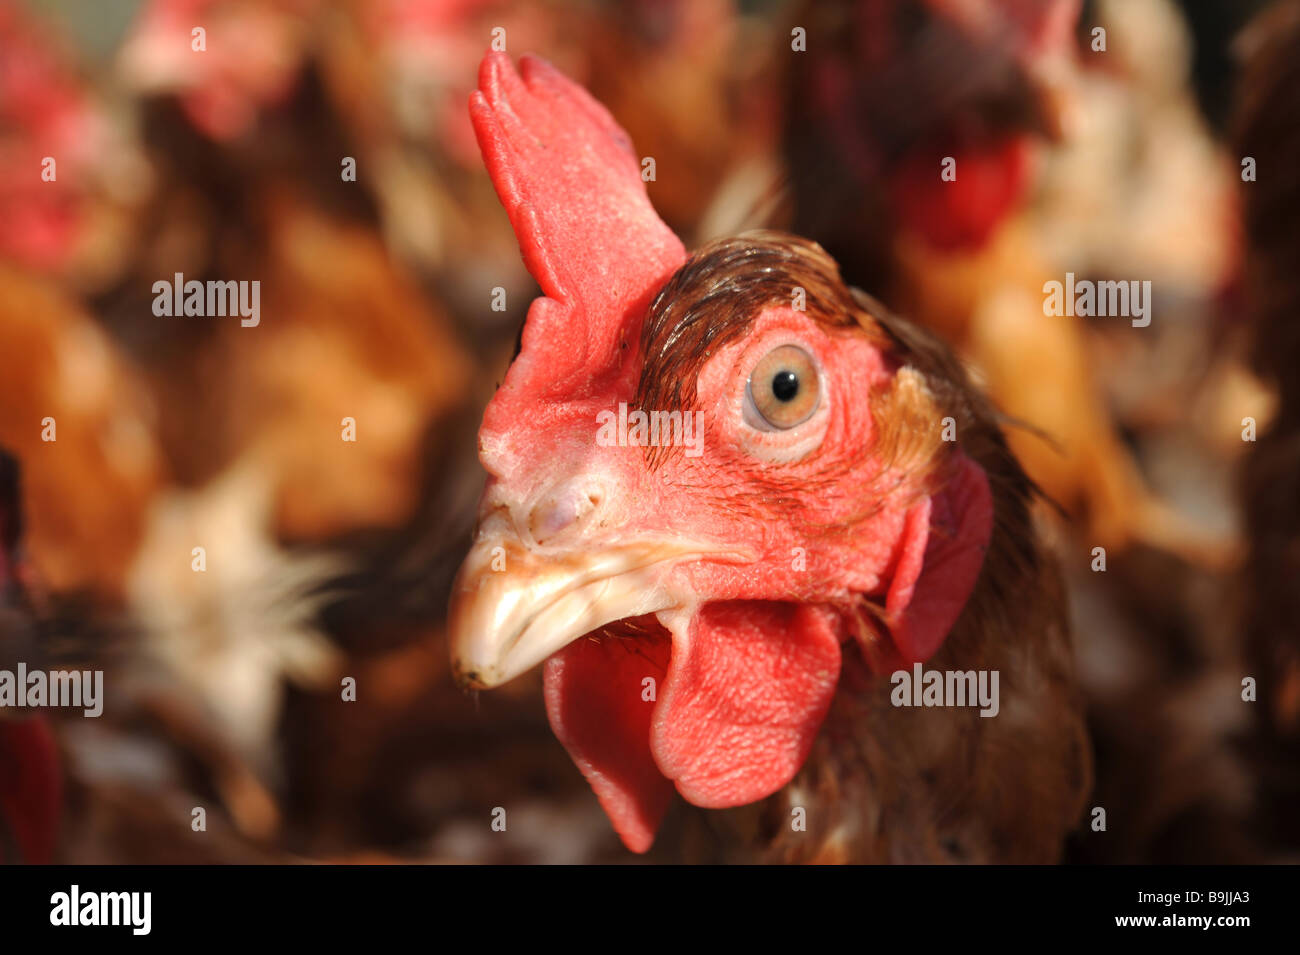 Close focus close up shot of a chickens head on a free range farm Stock Photo